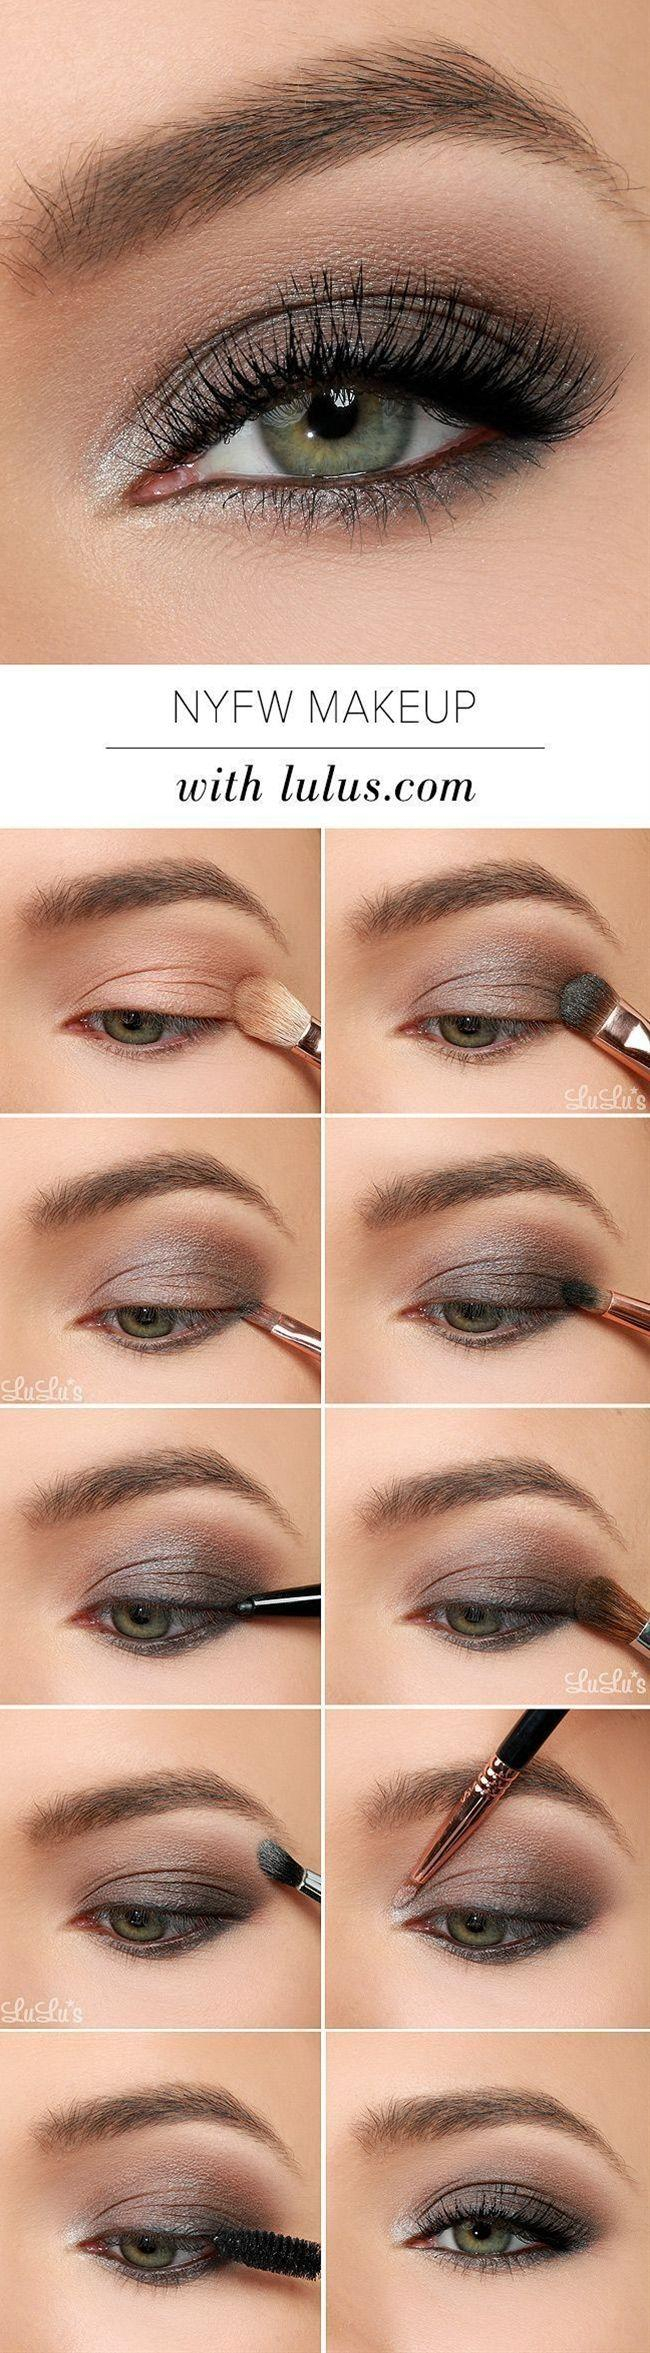 Black And Silver Eye Makeup This Nyfw Inspired Eye Makeup Tutorial Uses Gray Black And